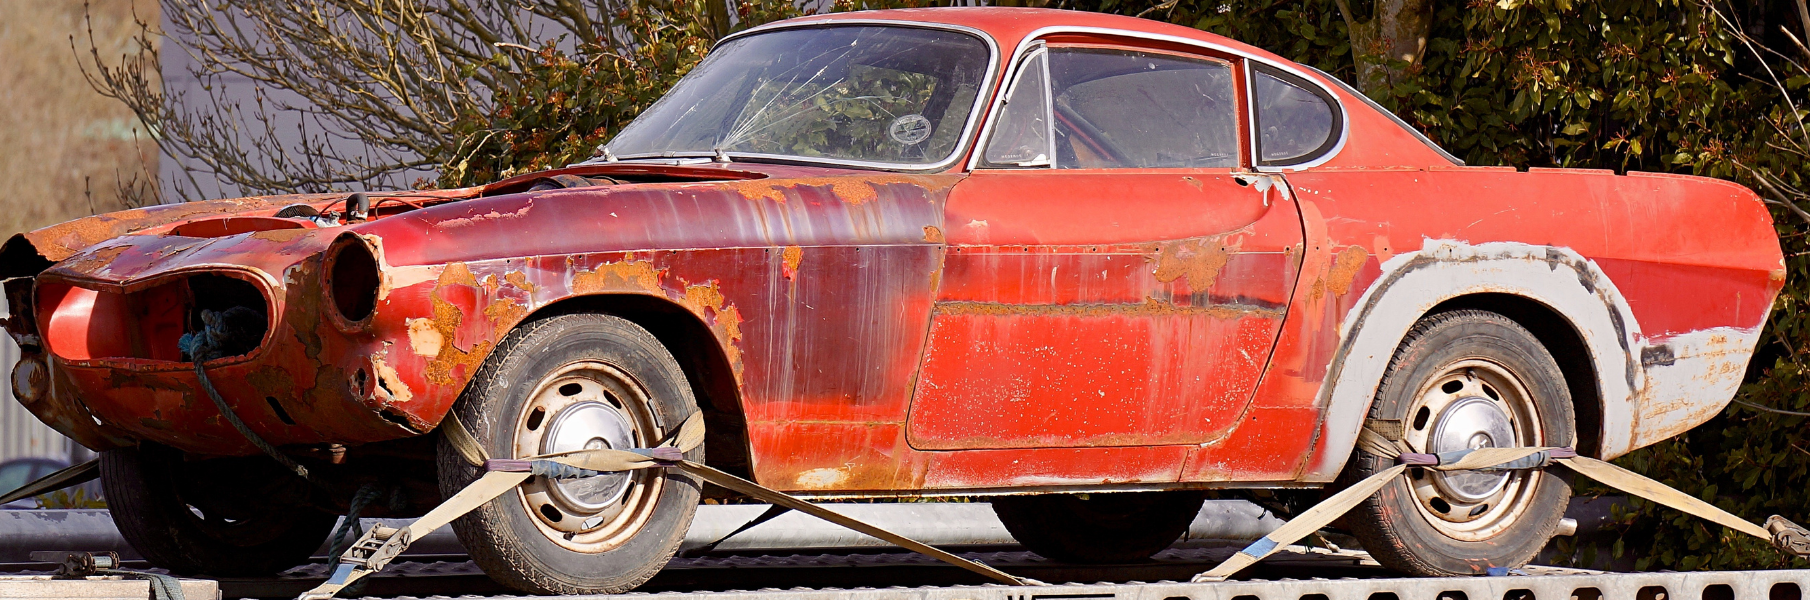 Old orange junk car that is rusting. The car is strapped to the platform on the back of a truck.